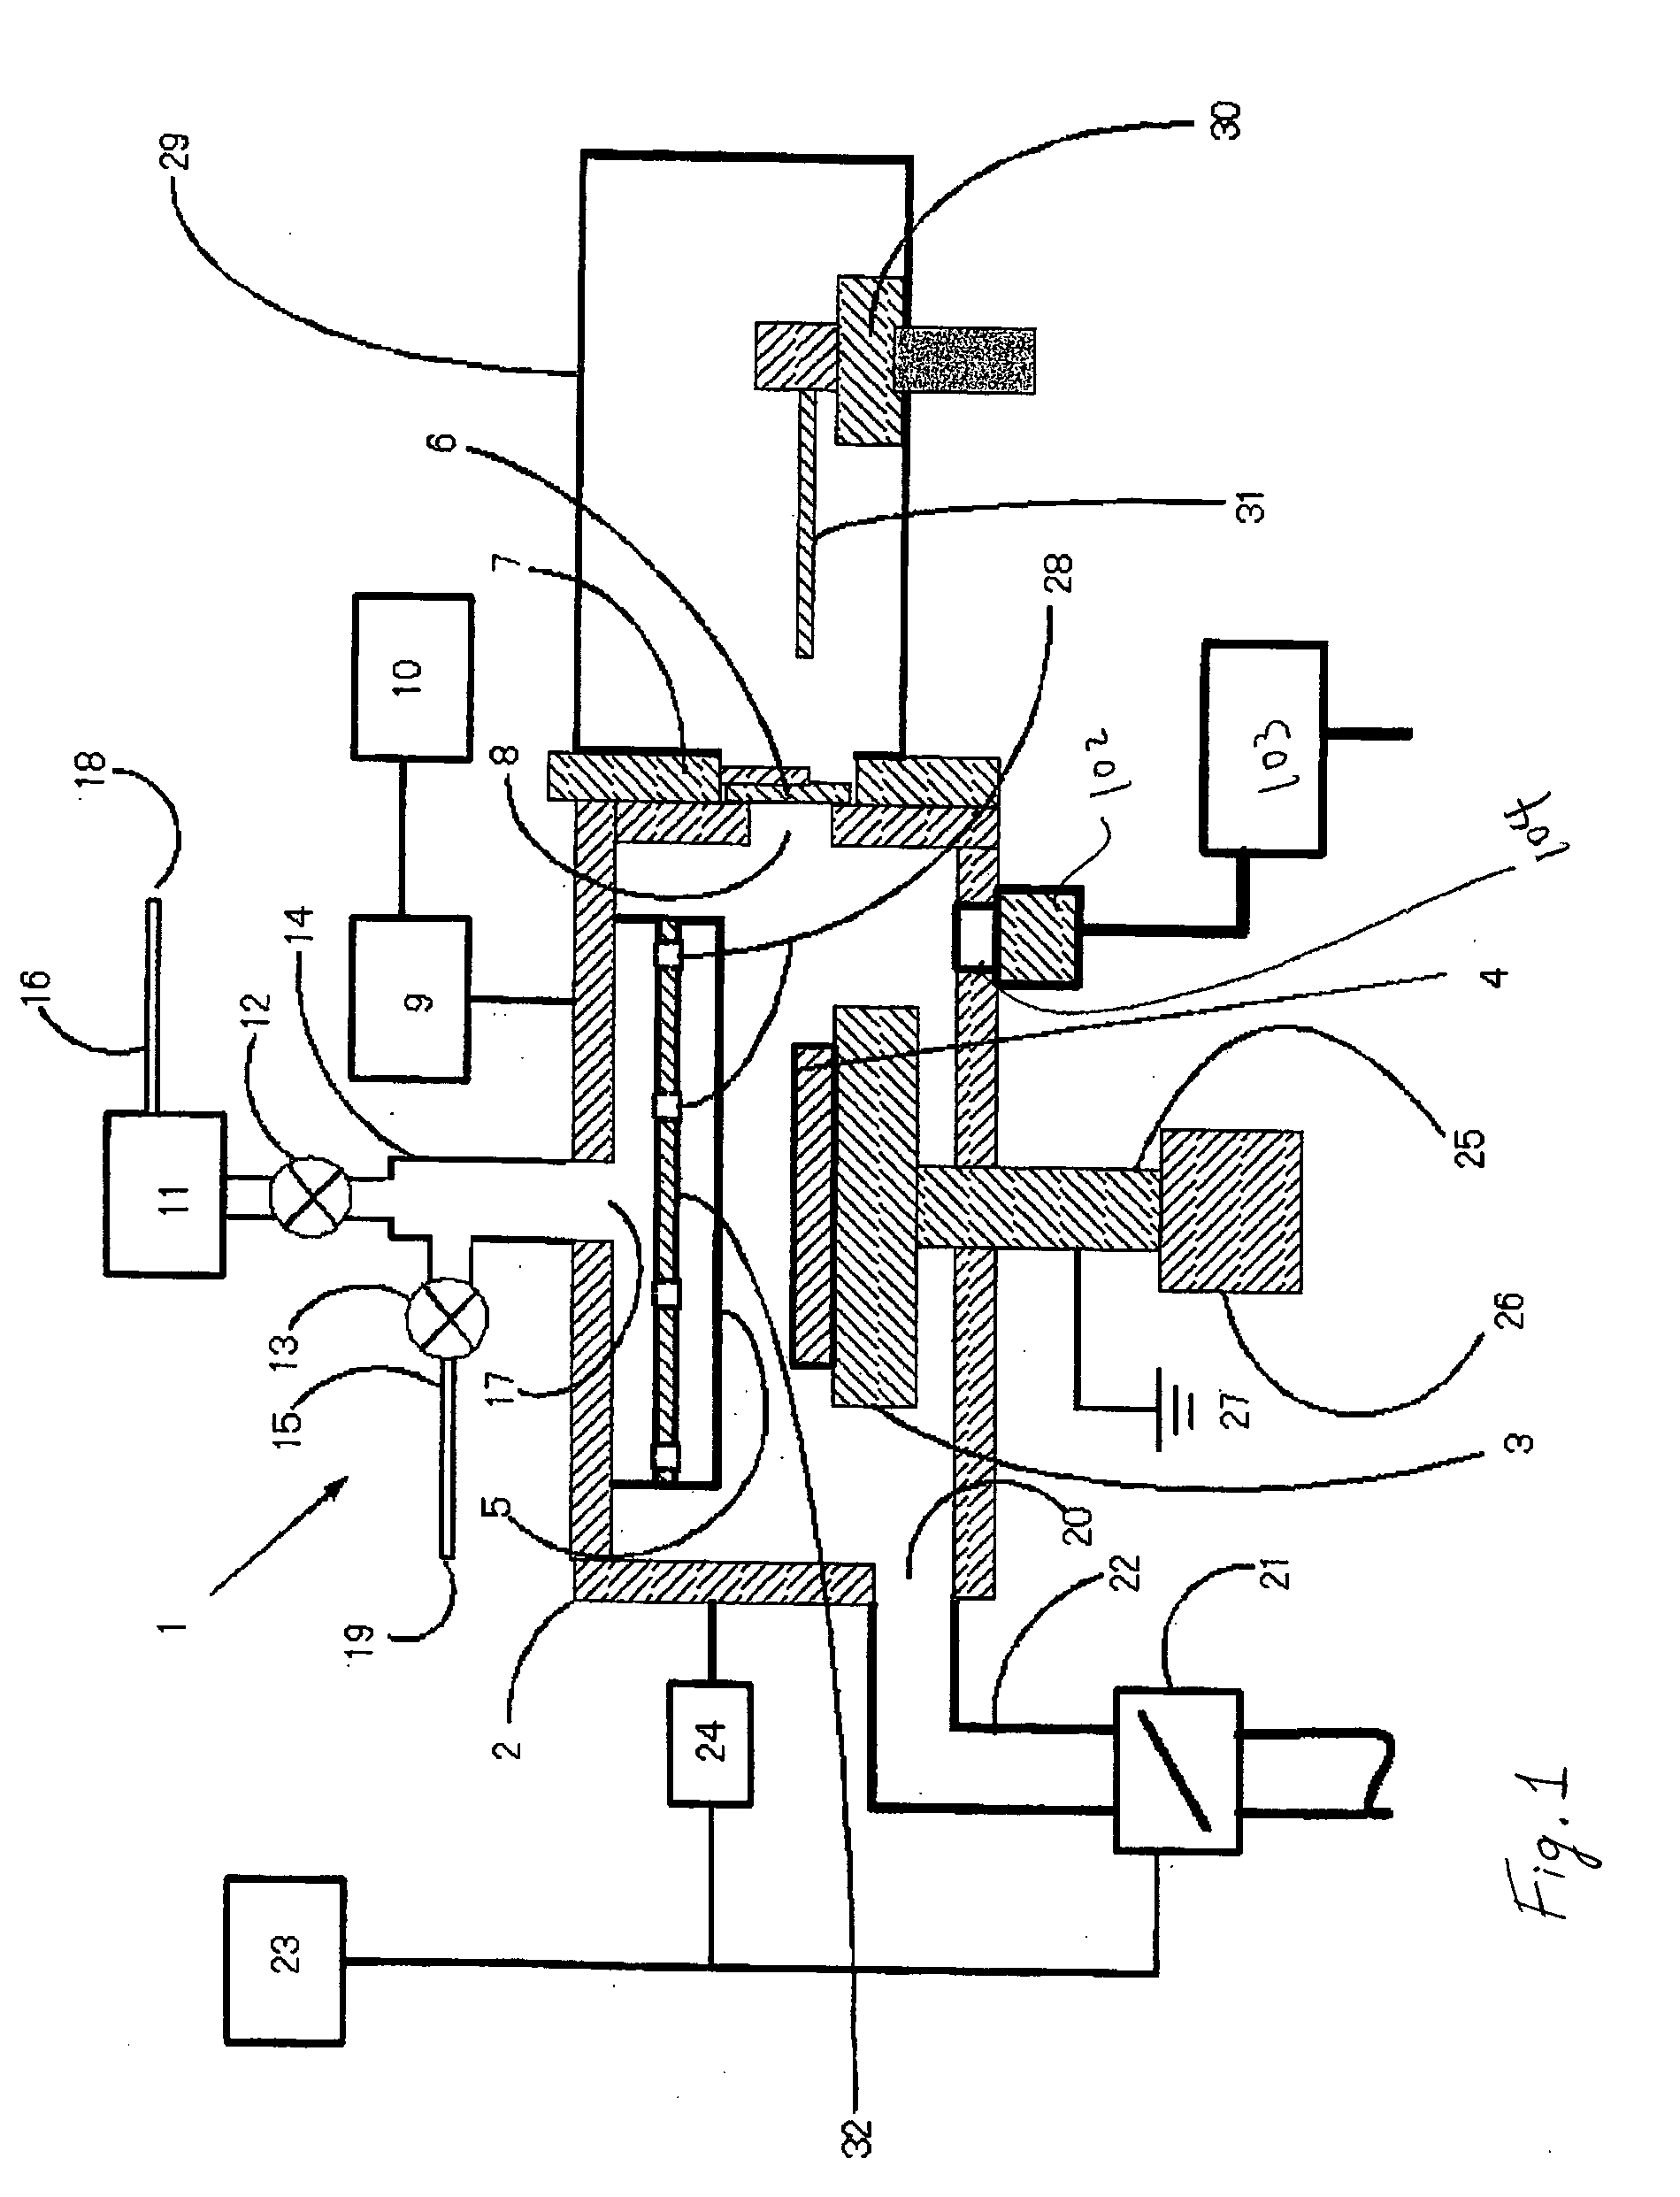 Semiconductor-processing apparatus provided with self-cleaning device